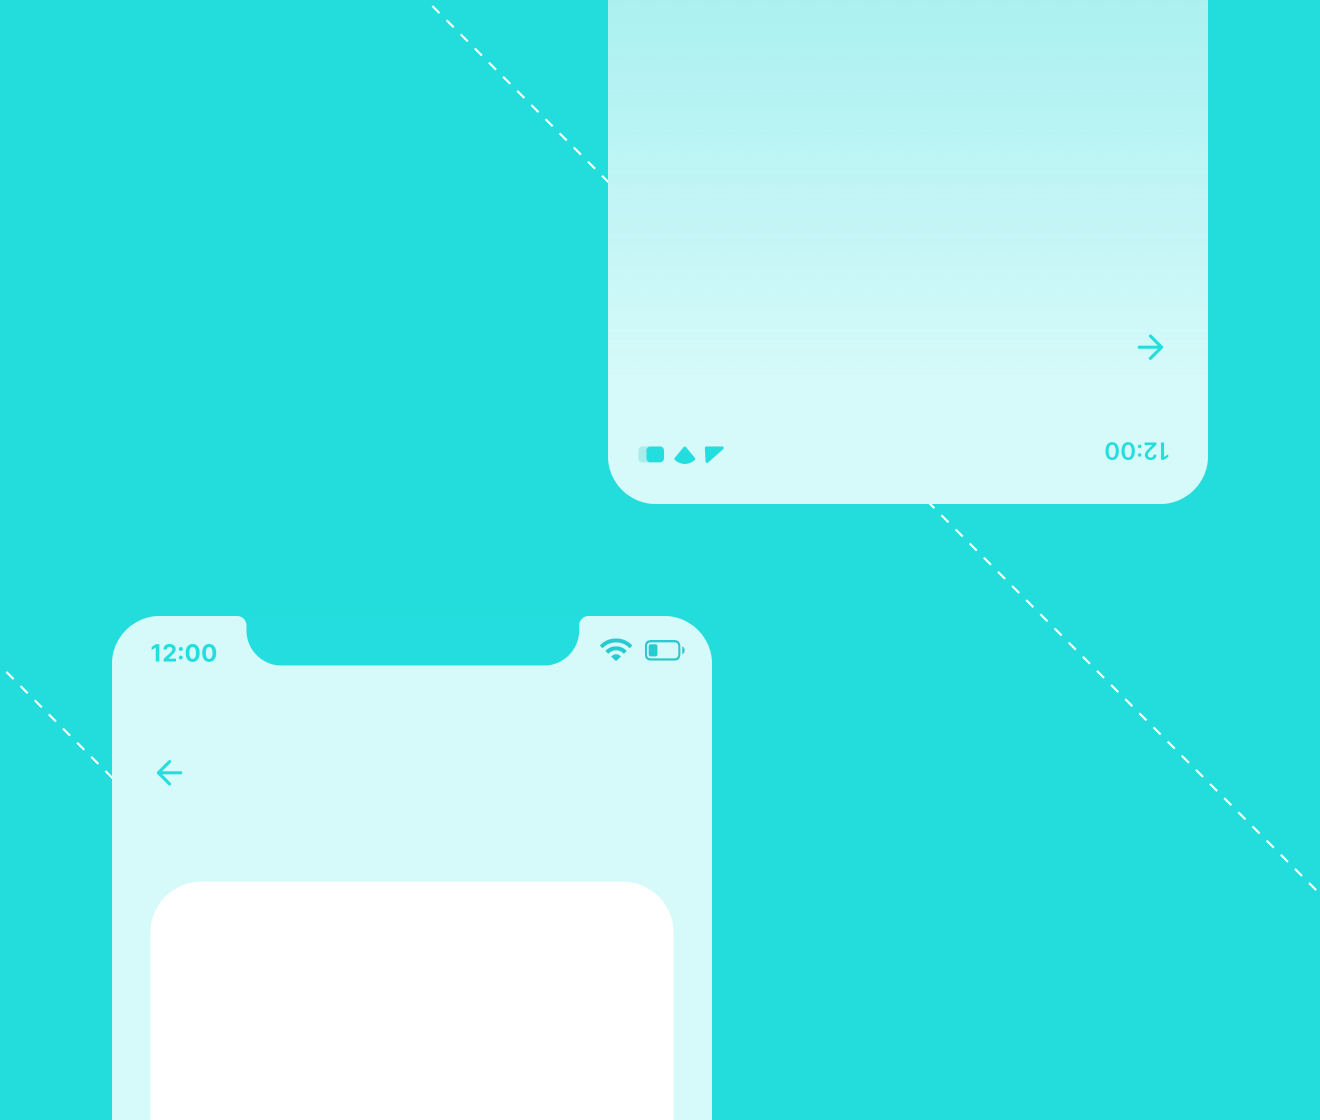 Create wireframes for iOS and Android apps